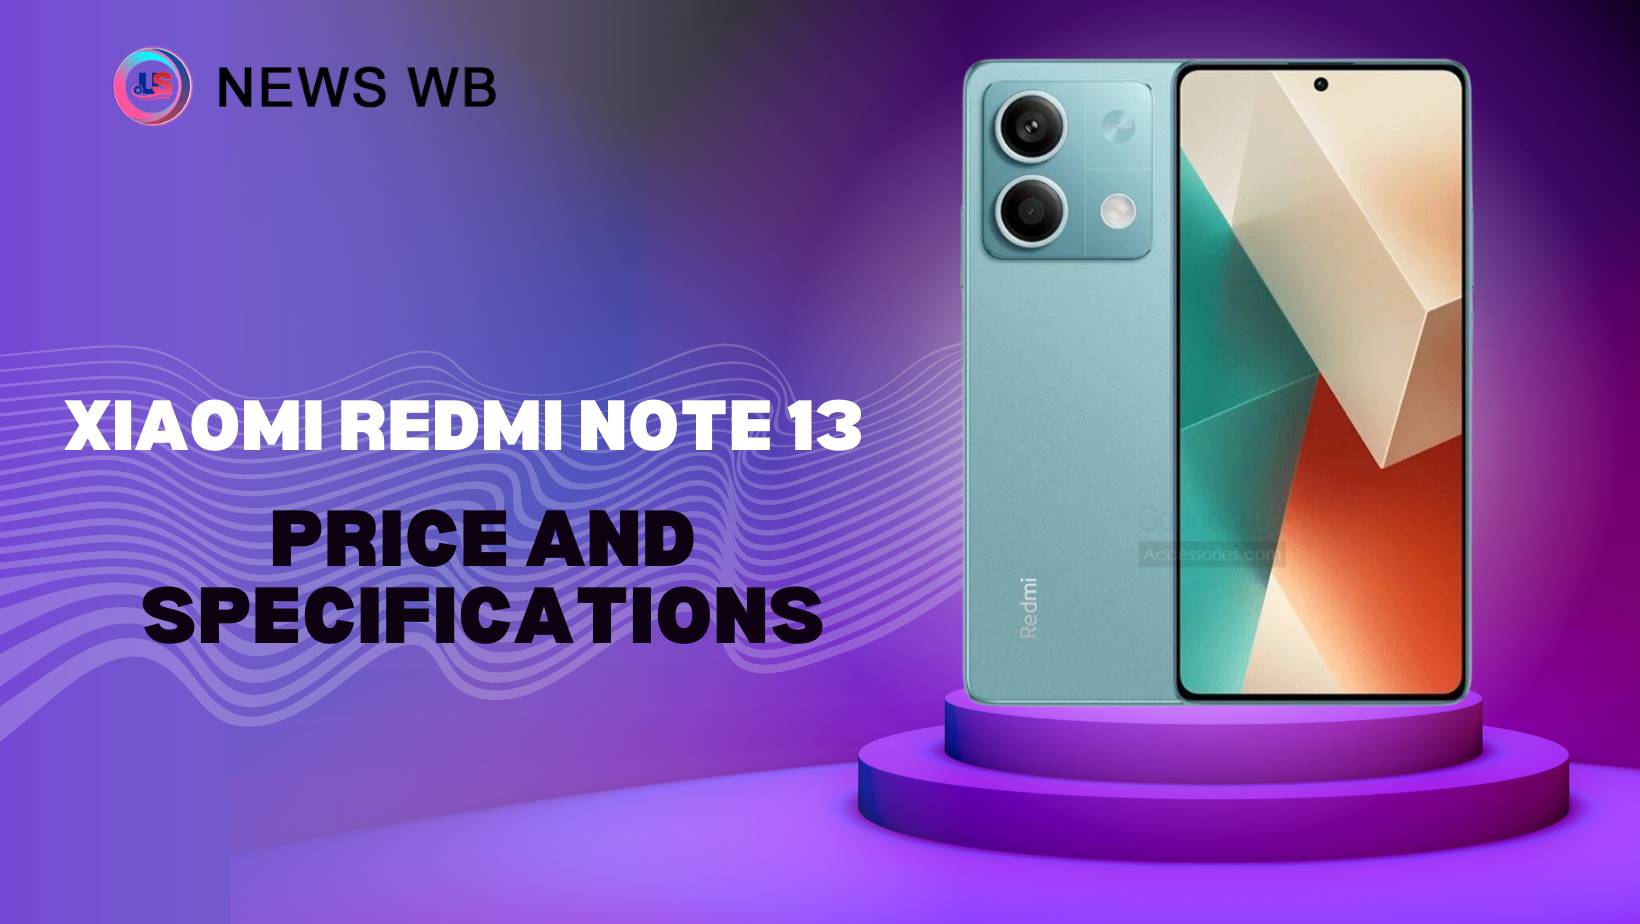 Xiaomi Redmi Note 13 Price and Specifications